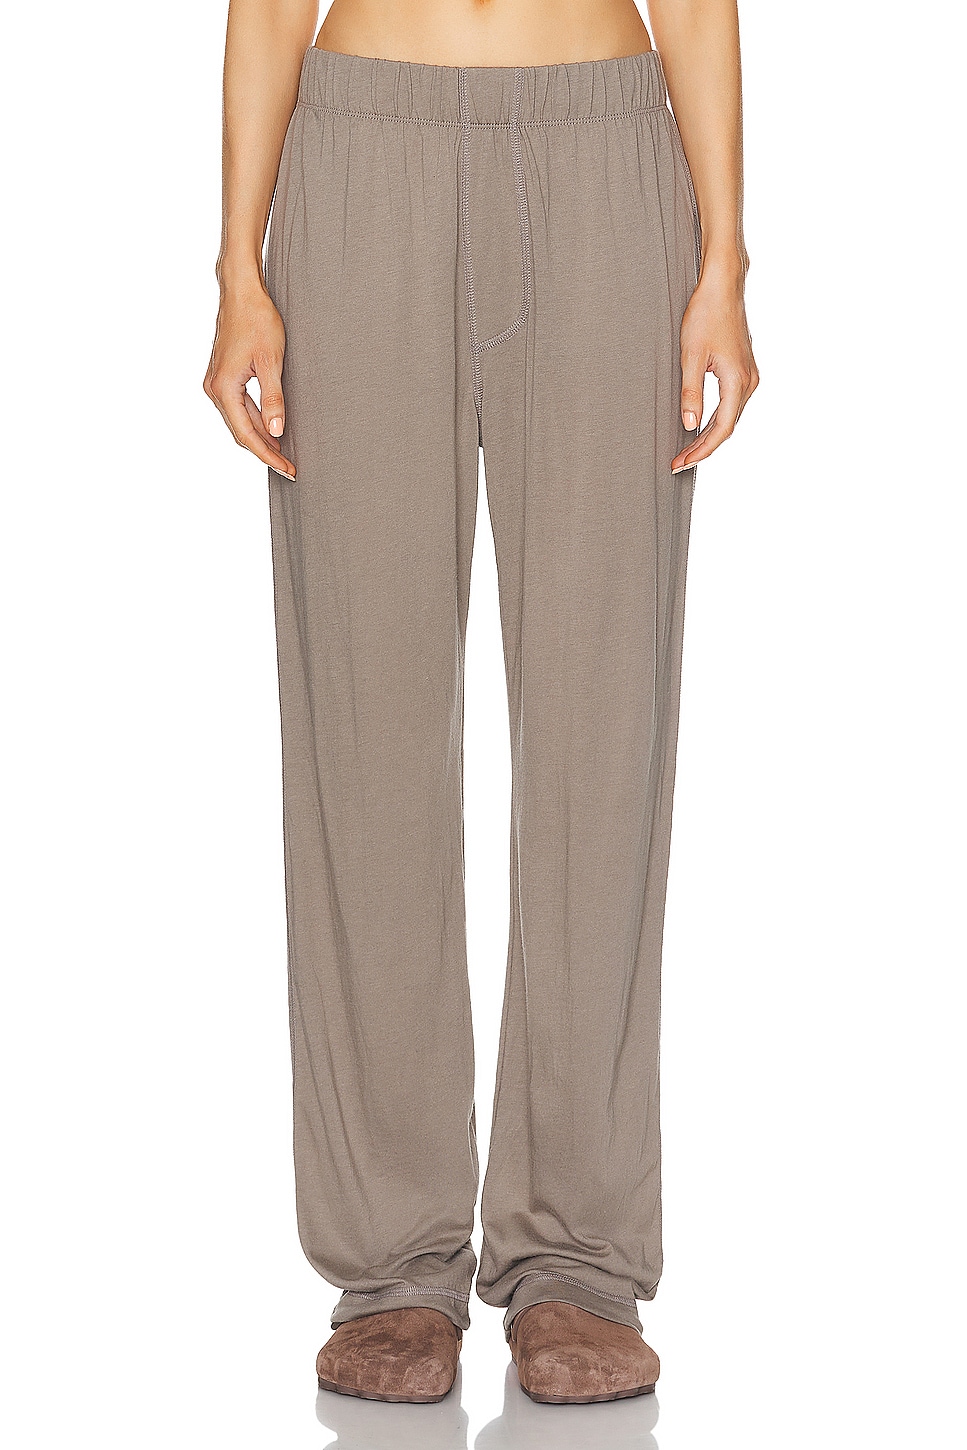 Image 1 of Eterne Lounge Pant in Clay